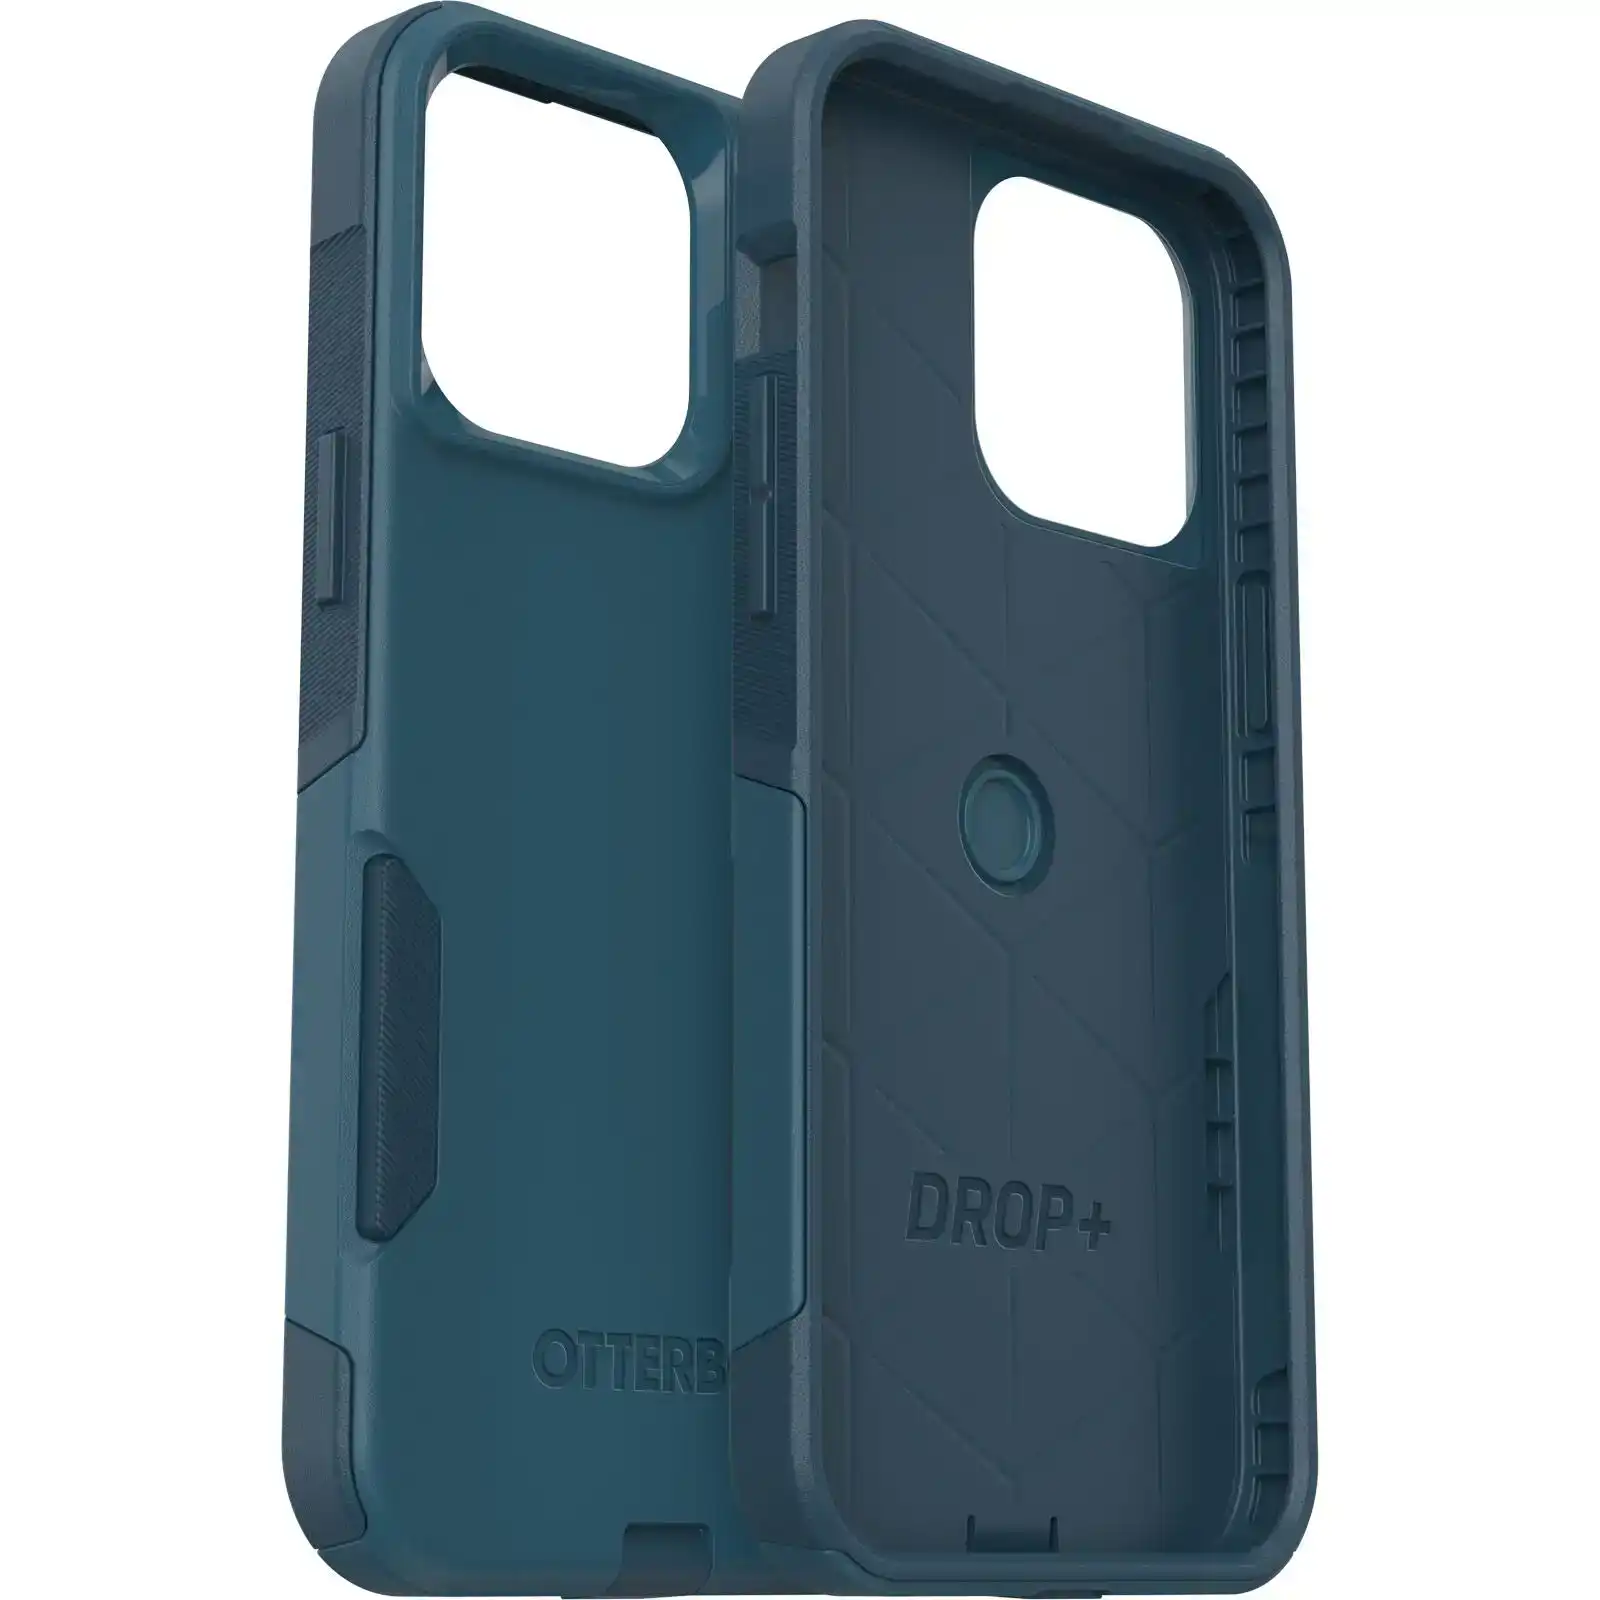 OtterBox Commuter Series Case for iPhone XR (Black)